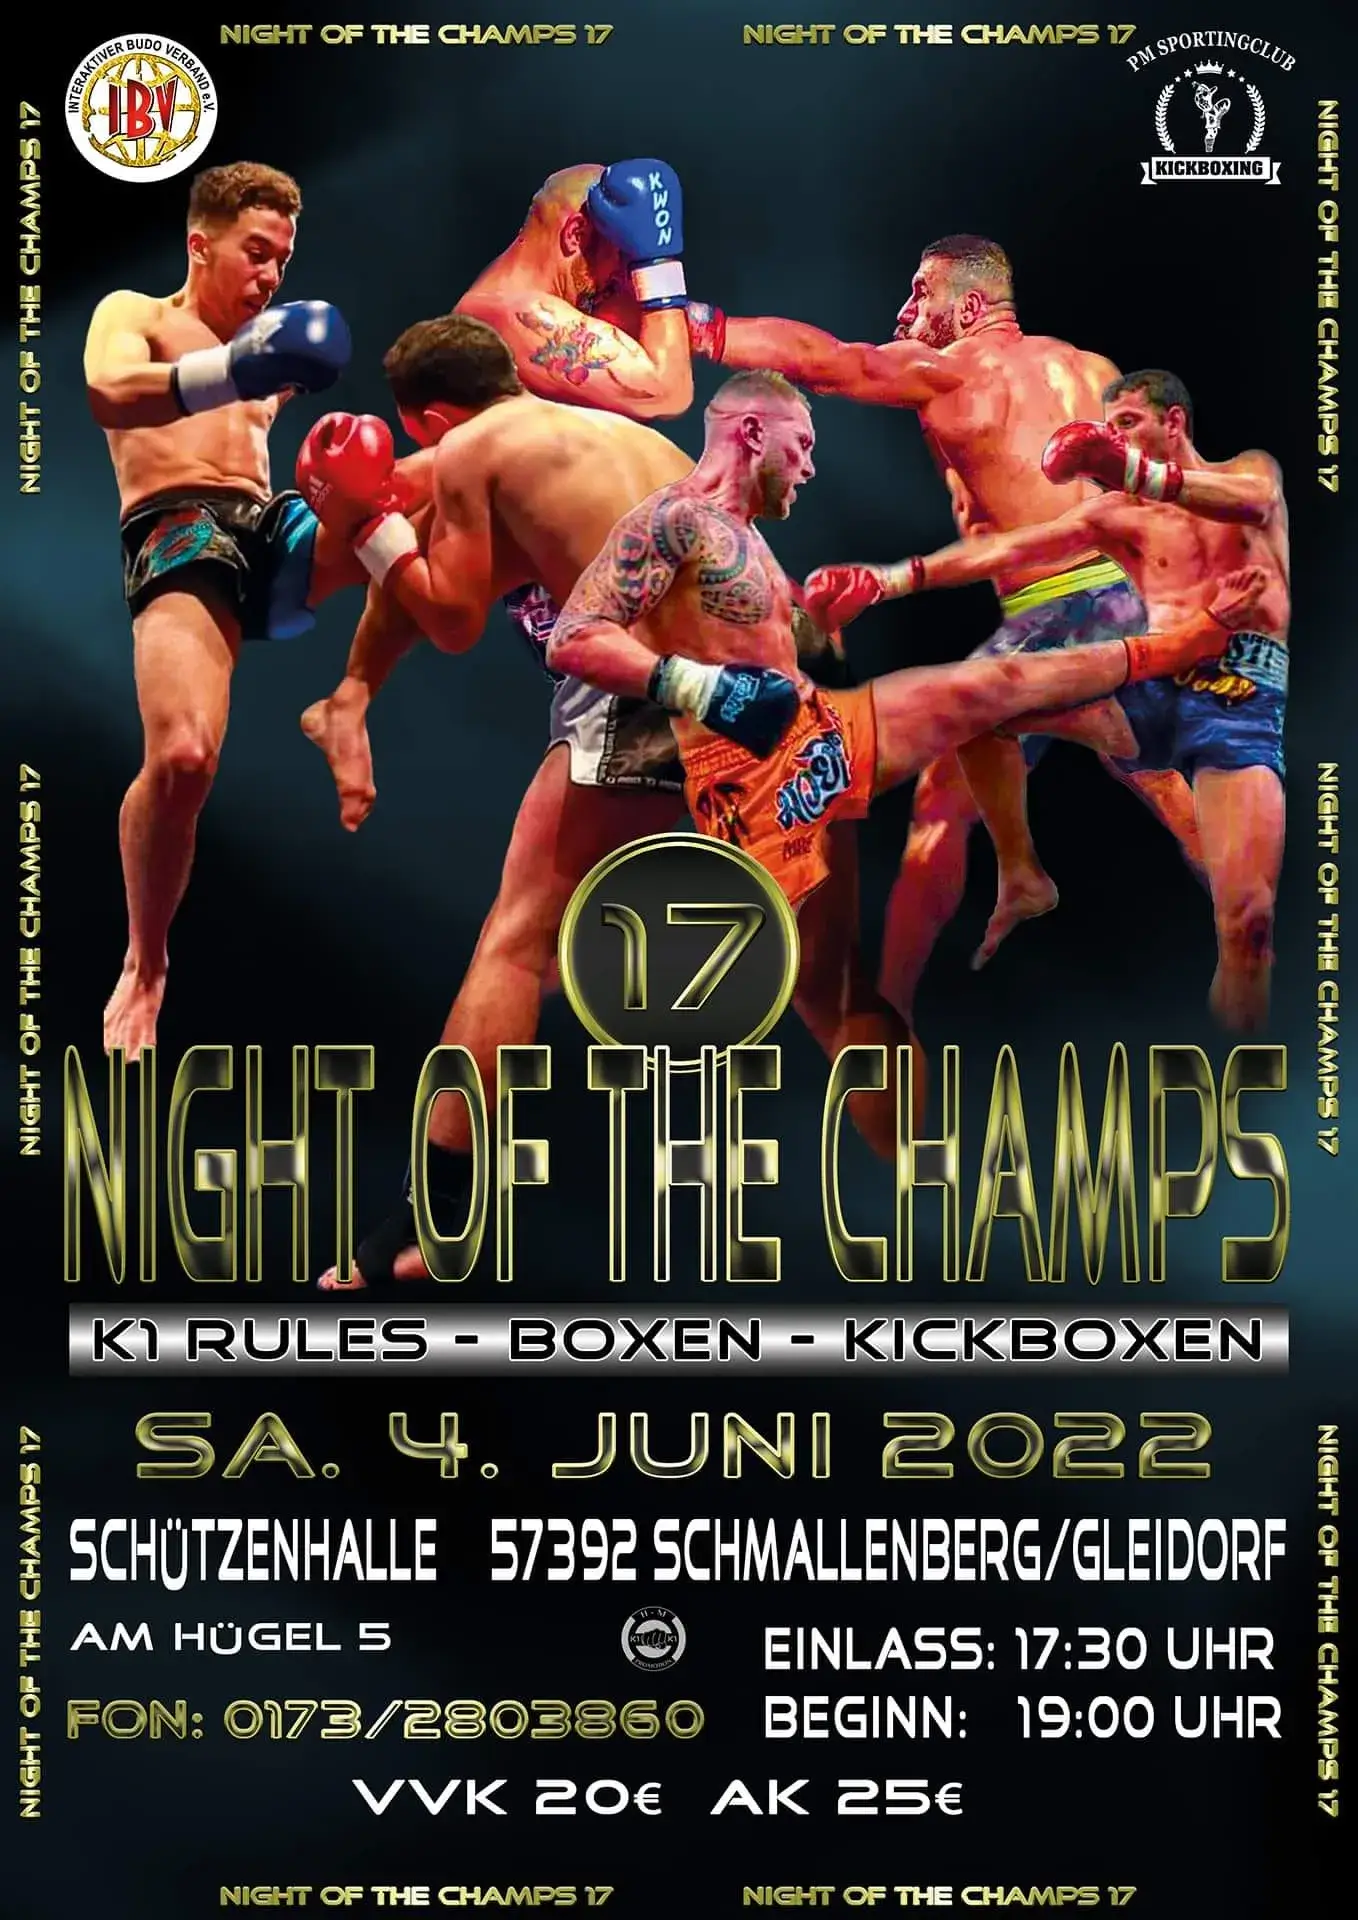 Night of the Champs Samstag 21 August 2021